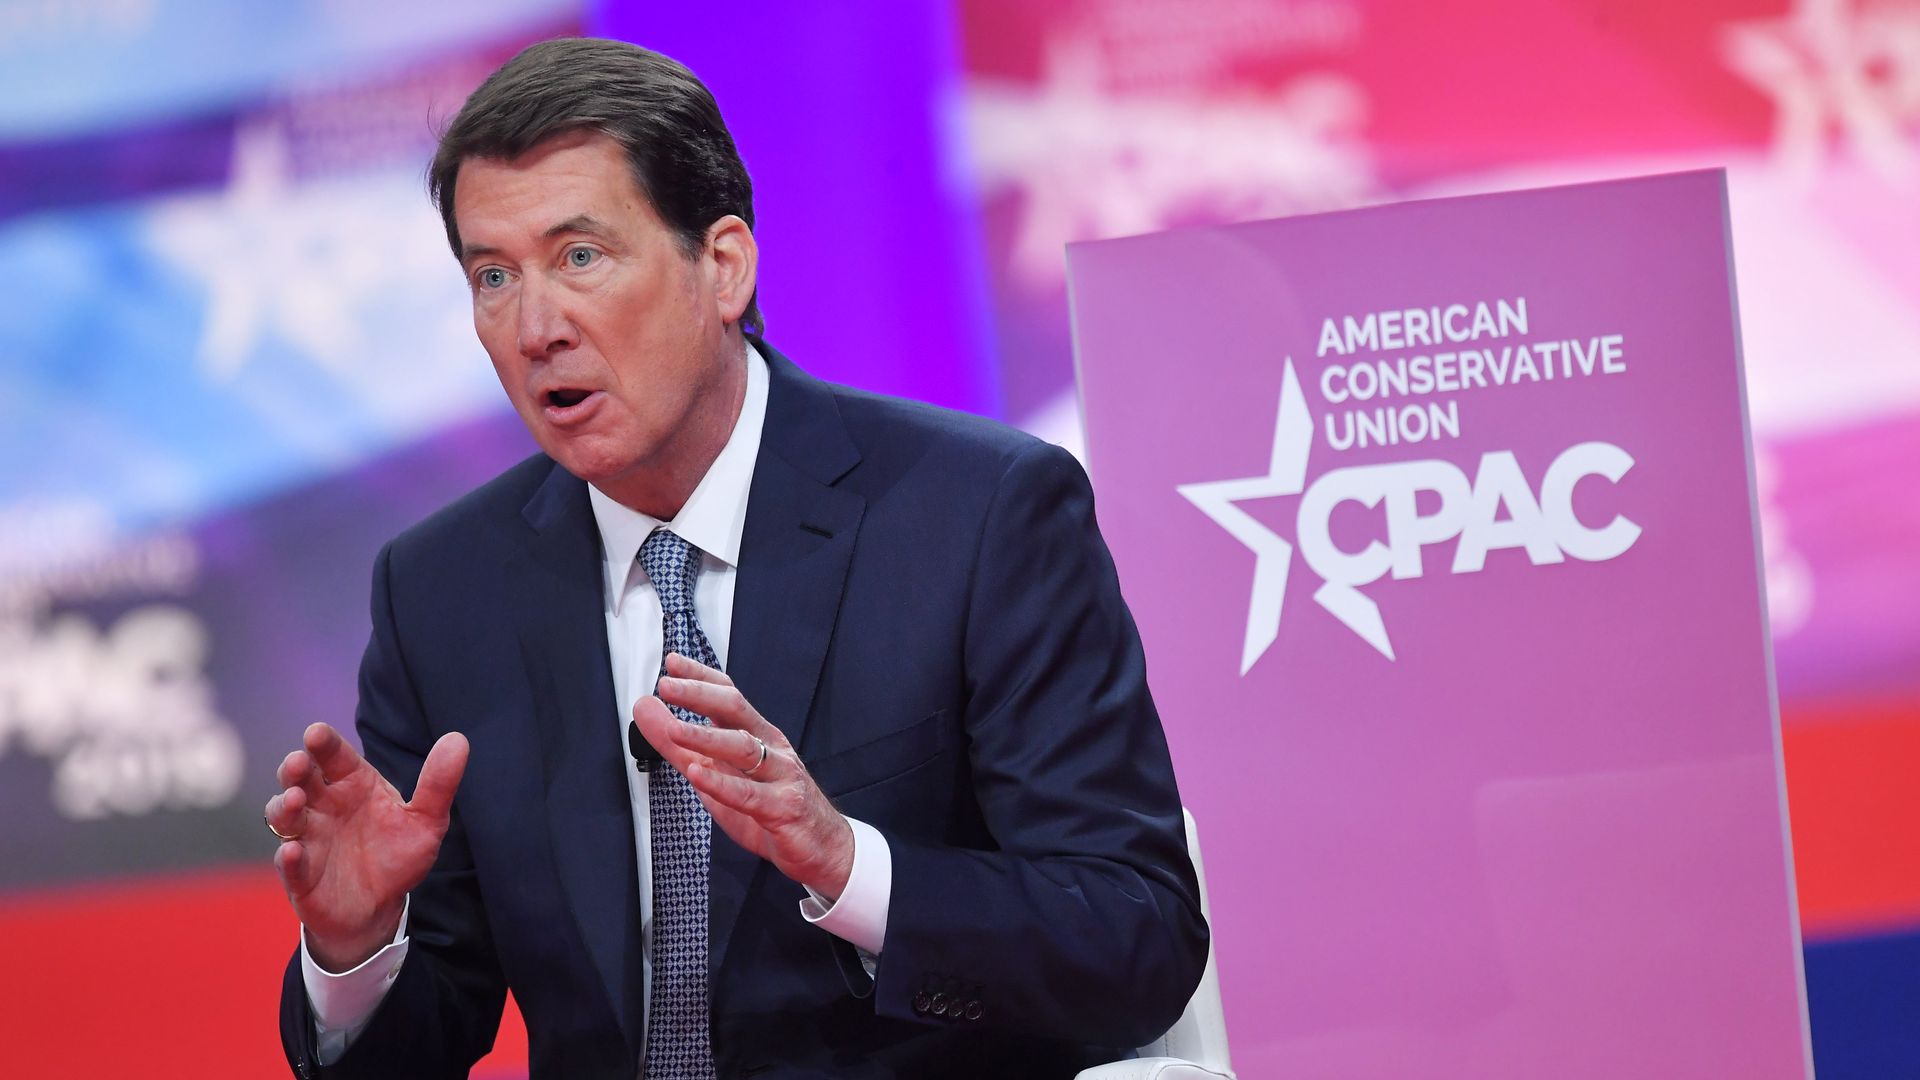 Former U.S. Ambassador to Japan Bill Hagerty speaking at CPAC in 2019.